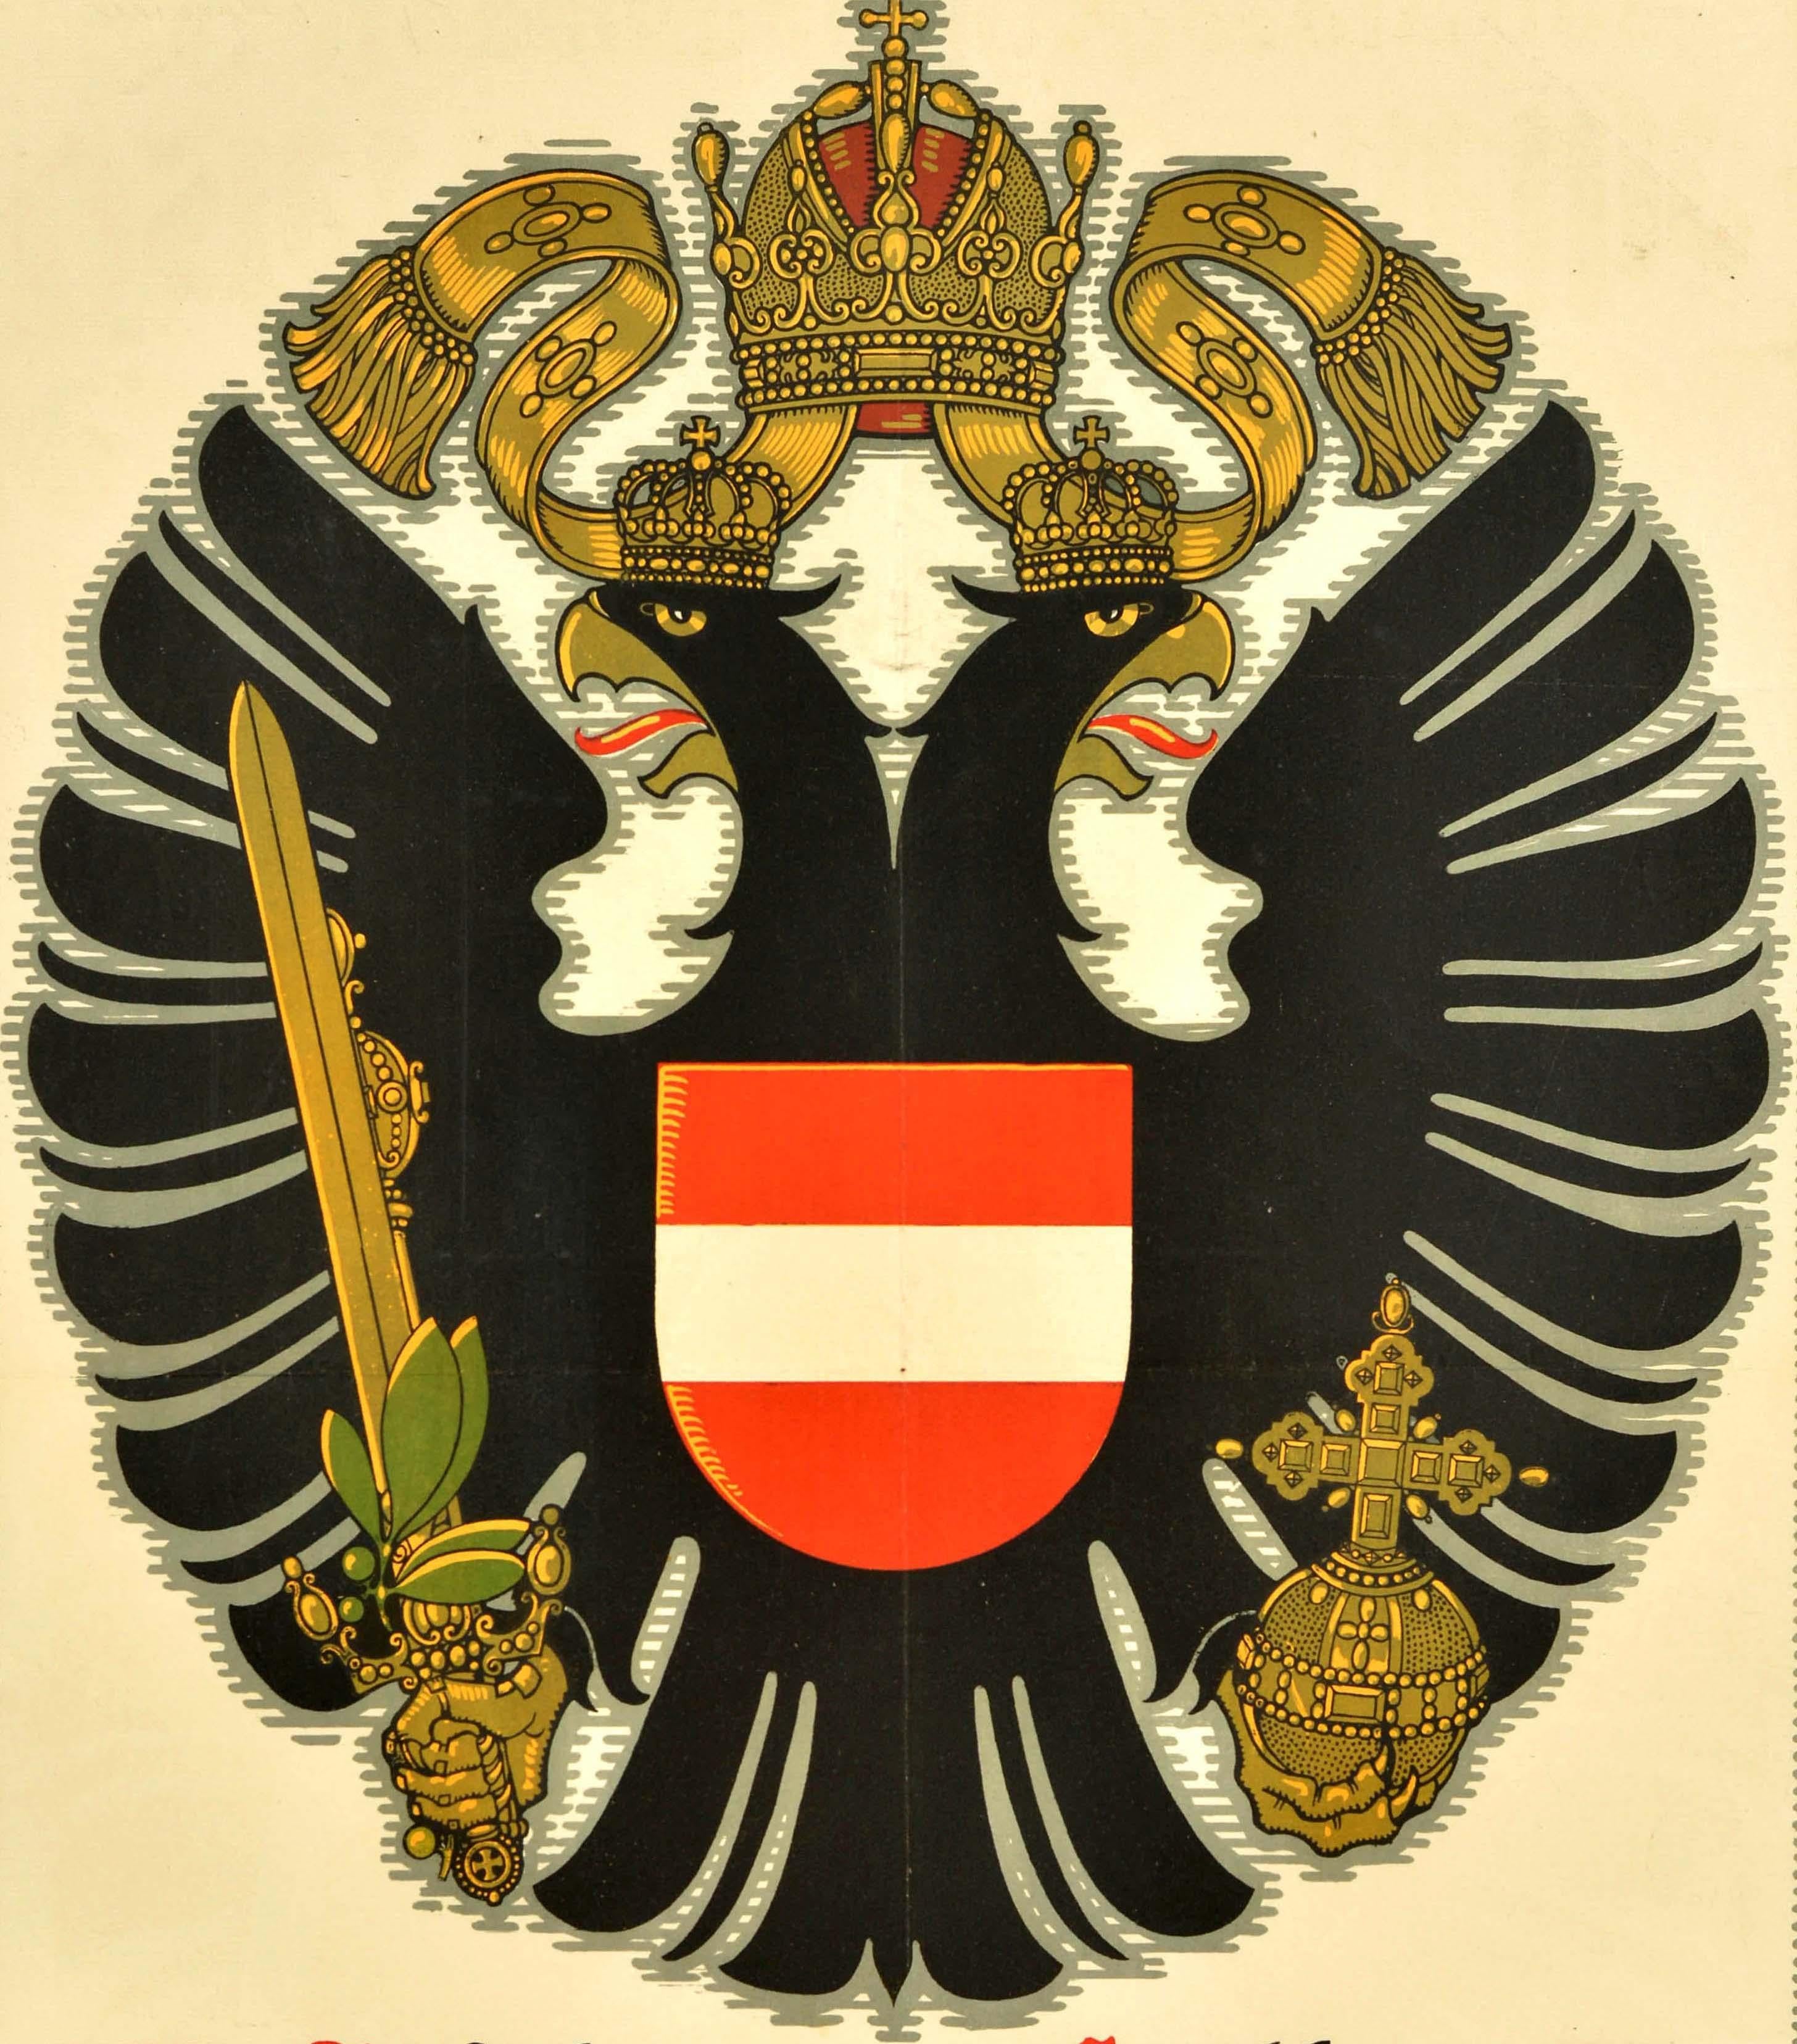 Original antique World War One war loan poster for the 5th Austrian War Bond featuring a decorative Austrian coat of arms symbol comprised of a crowned double headed eagle holding a sword and an orb with the red and white flag of Austria on a shield